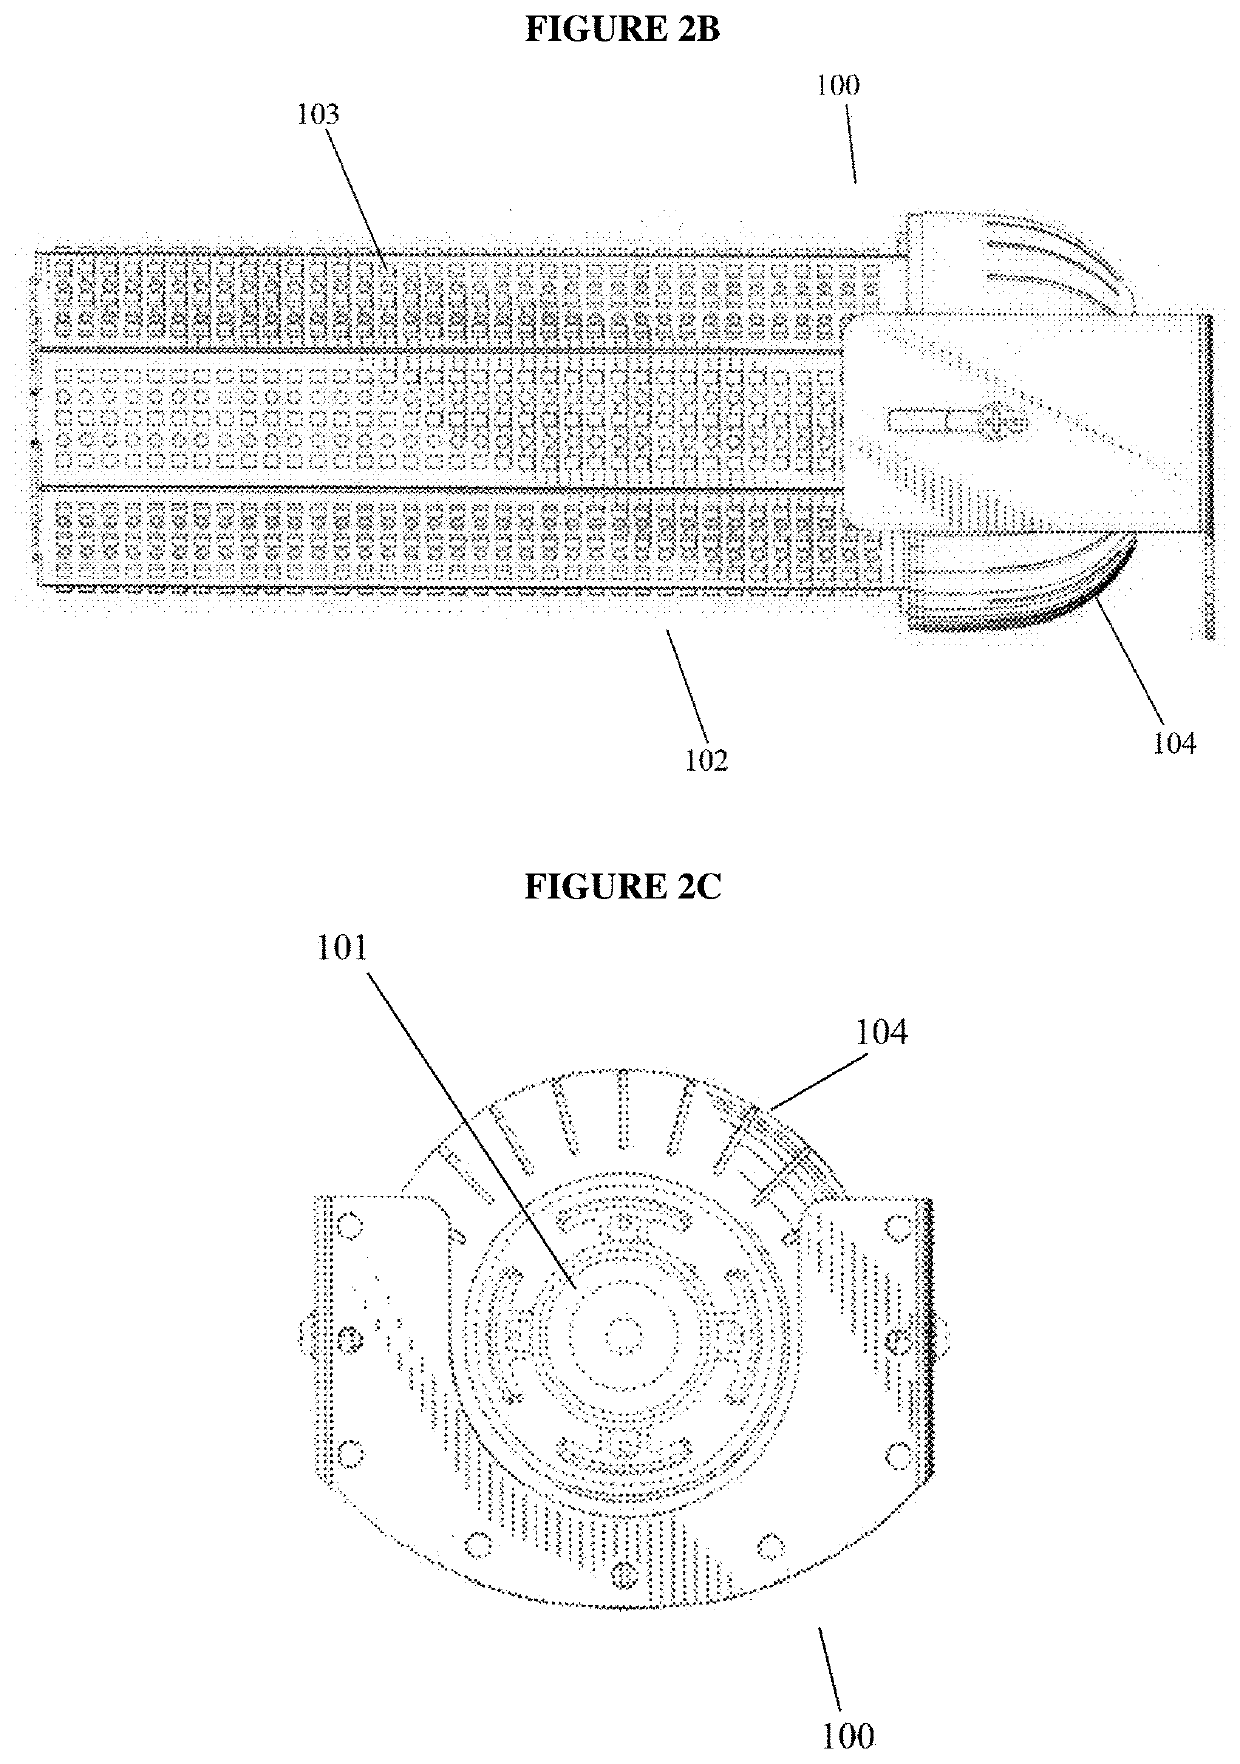 Ultraviolet disinfection device and uses thereof